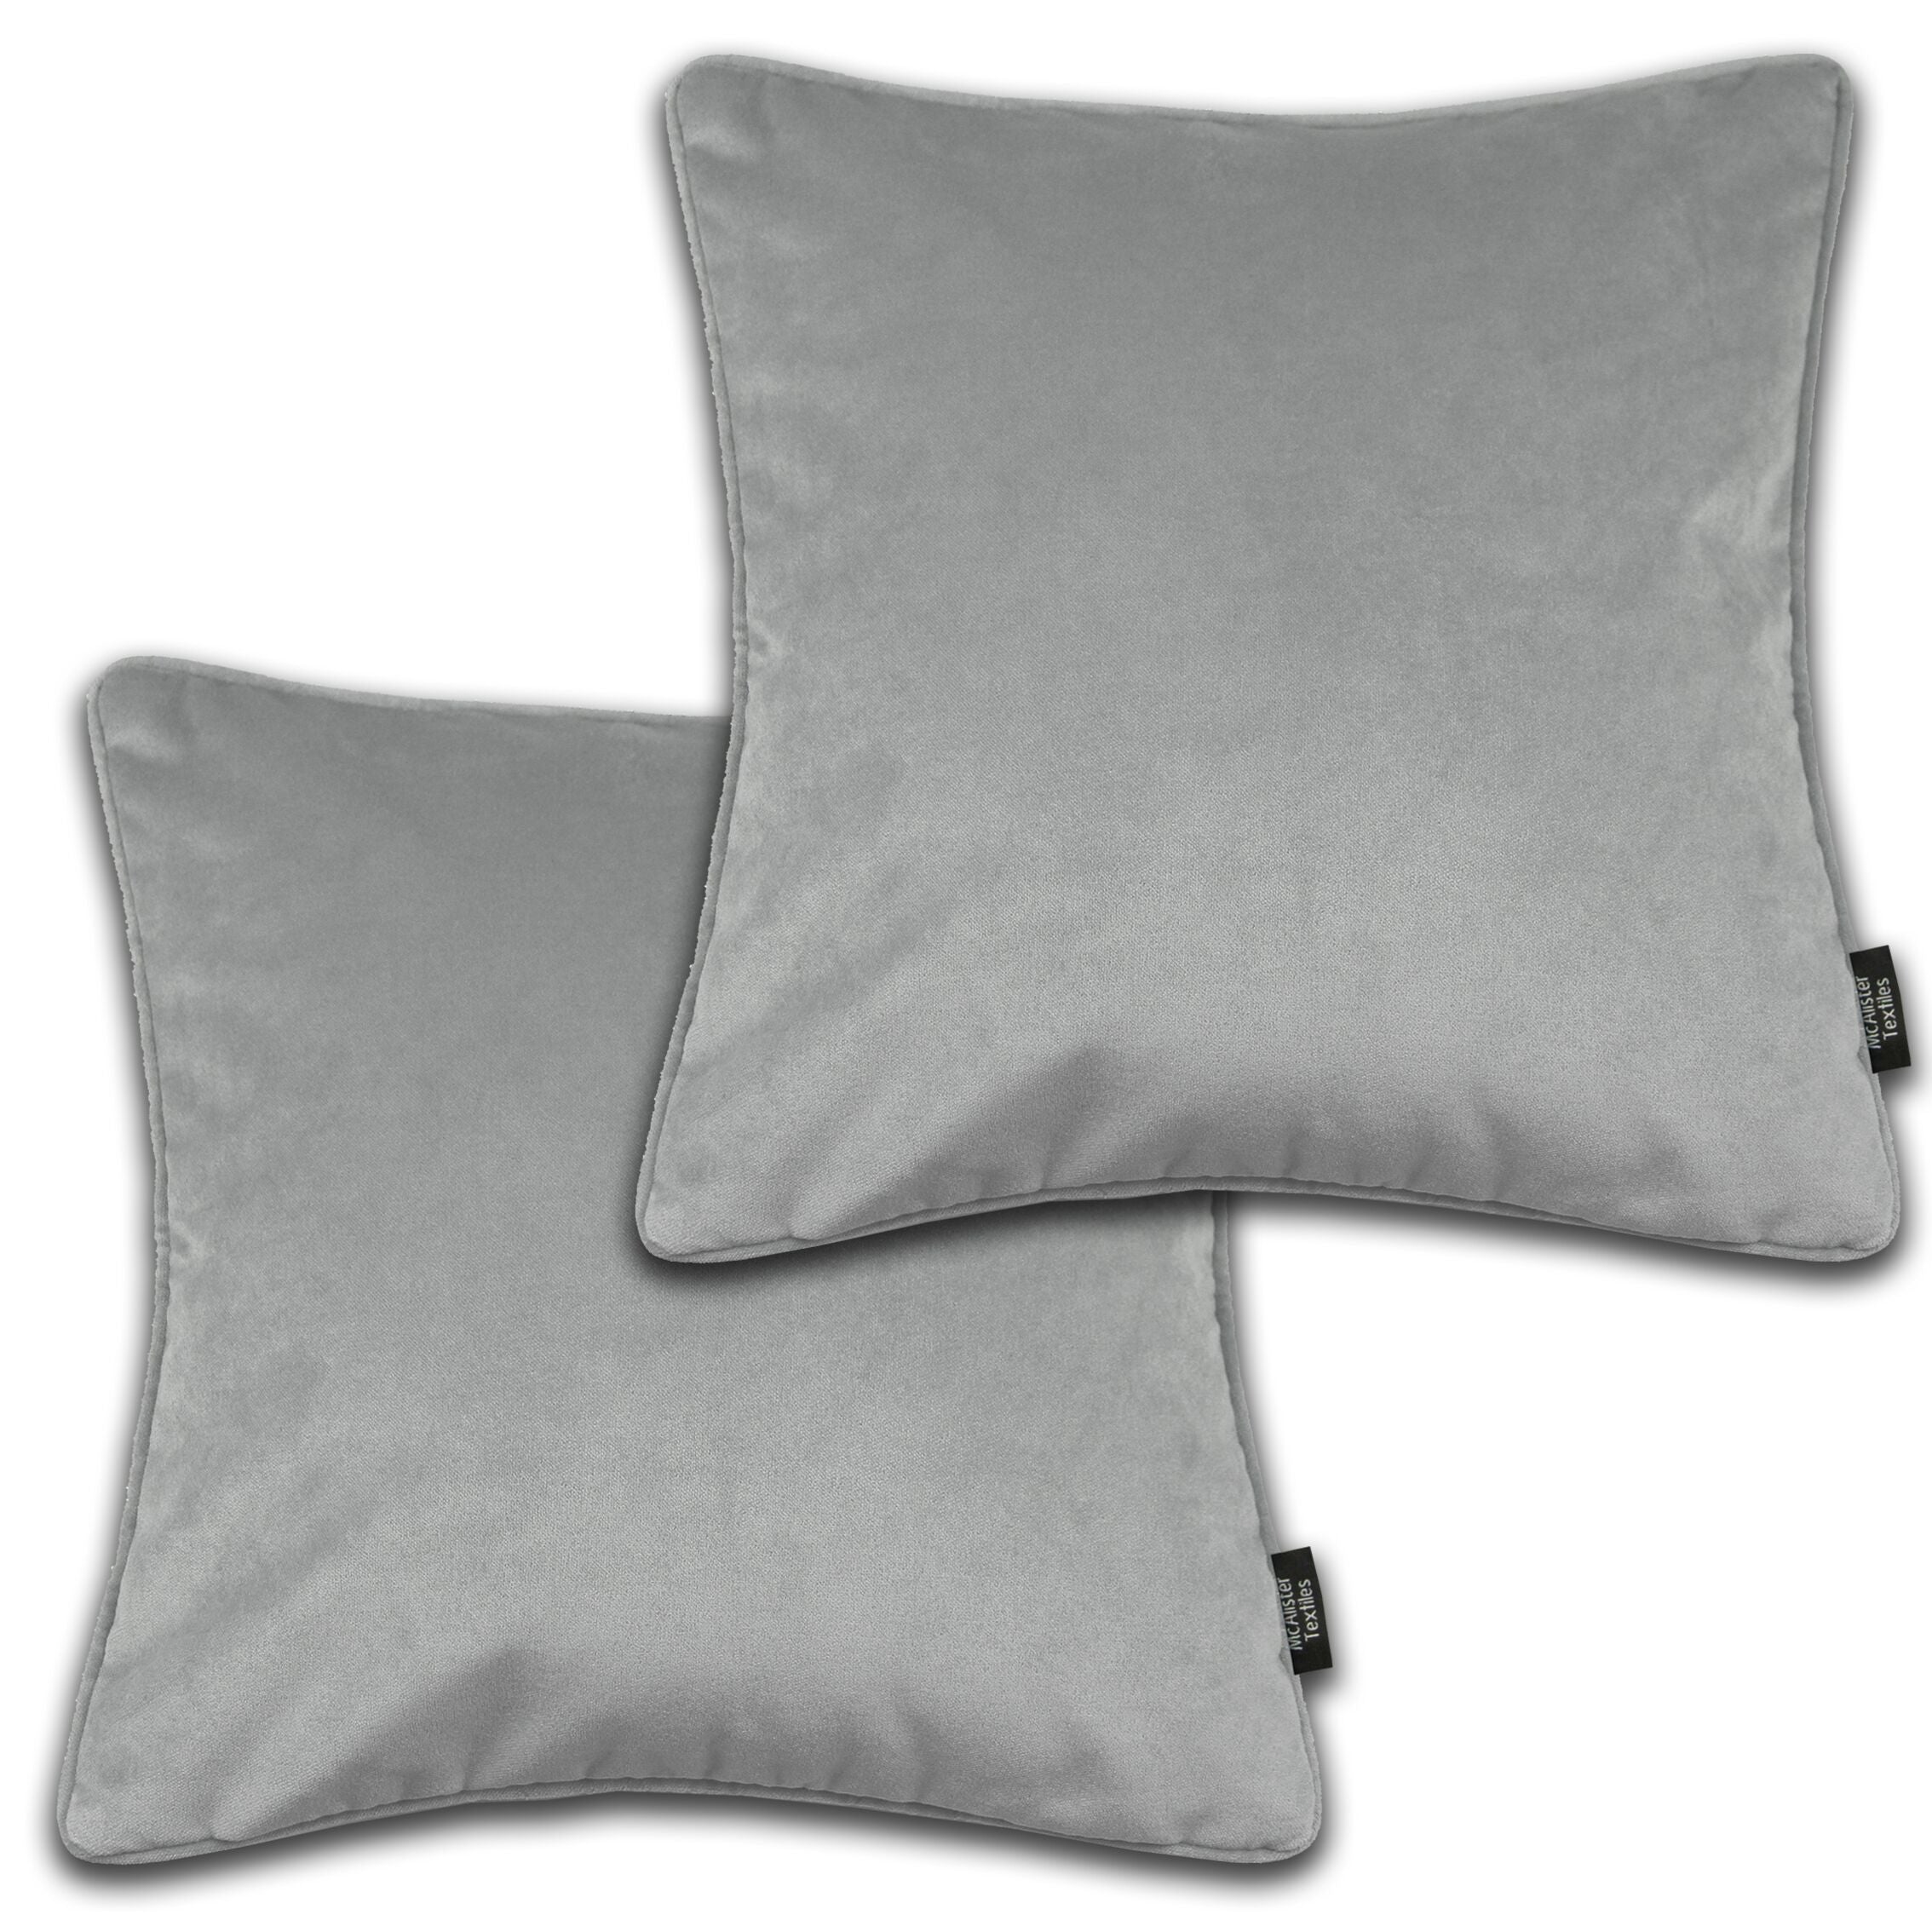 McAlister Textiles Matt Dove Grey Velvet 43cm x 43cm Piped Cushion Sets Cushions and Covers Cushion Covers Set of 2 